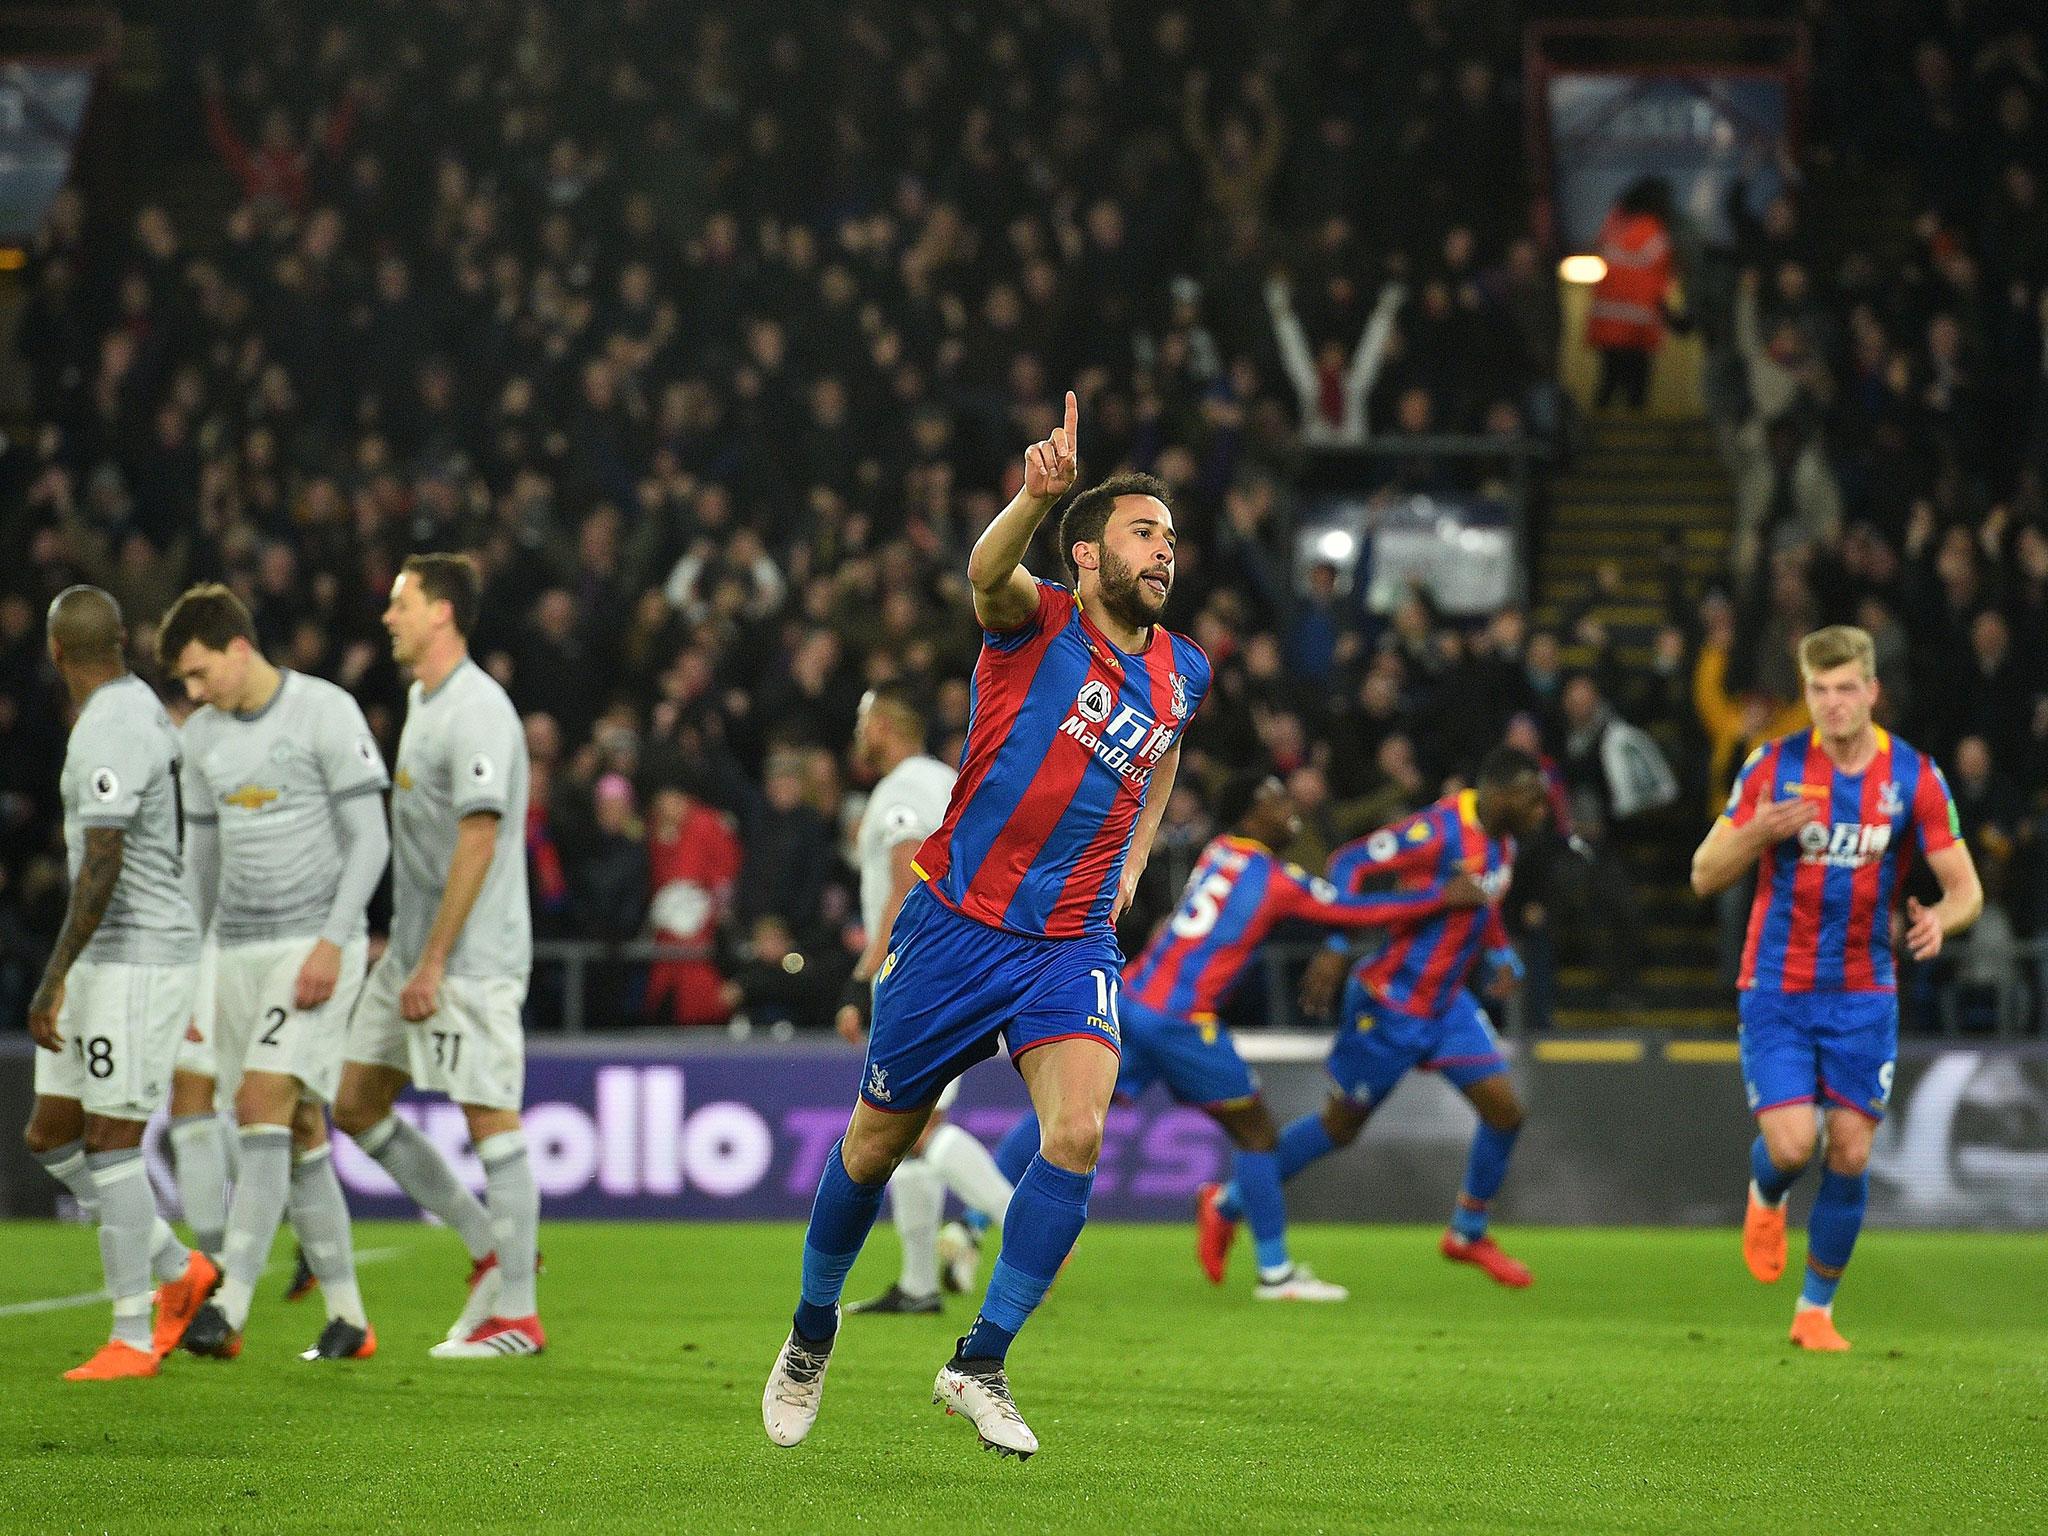 Andros Townsend gave Palace the lead